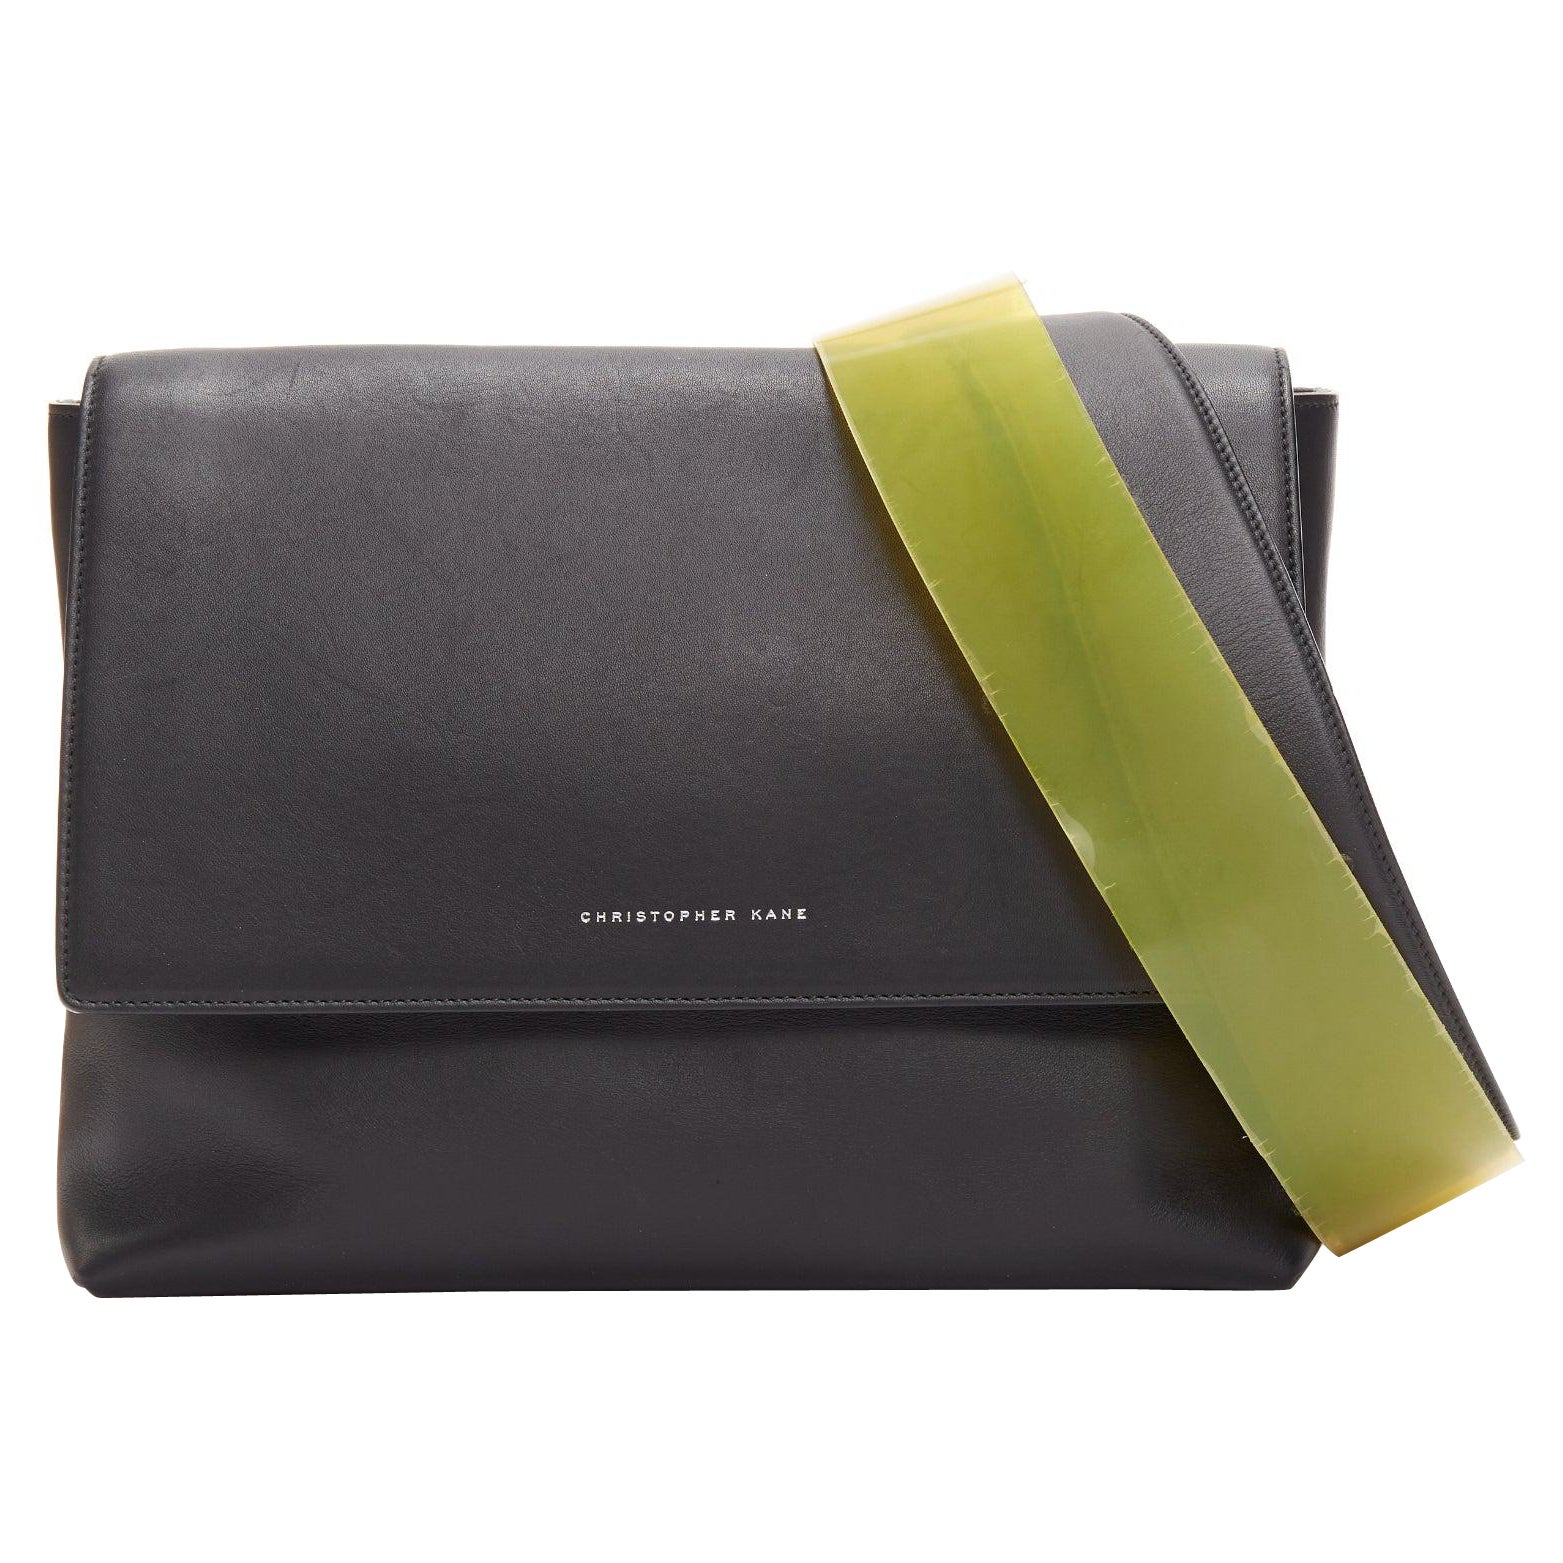 CHRISTOPHER KANE Dual black yellow scaled leather plastic strap reversible bag For Sale